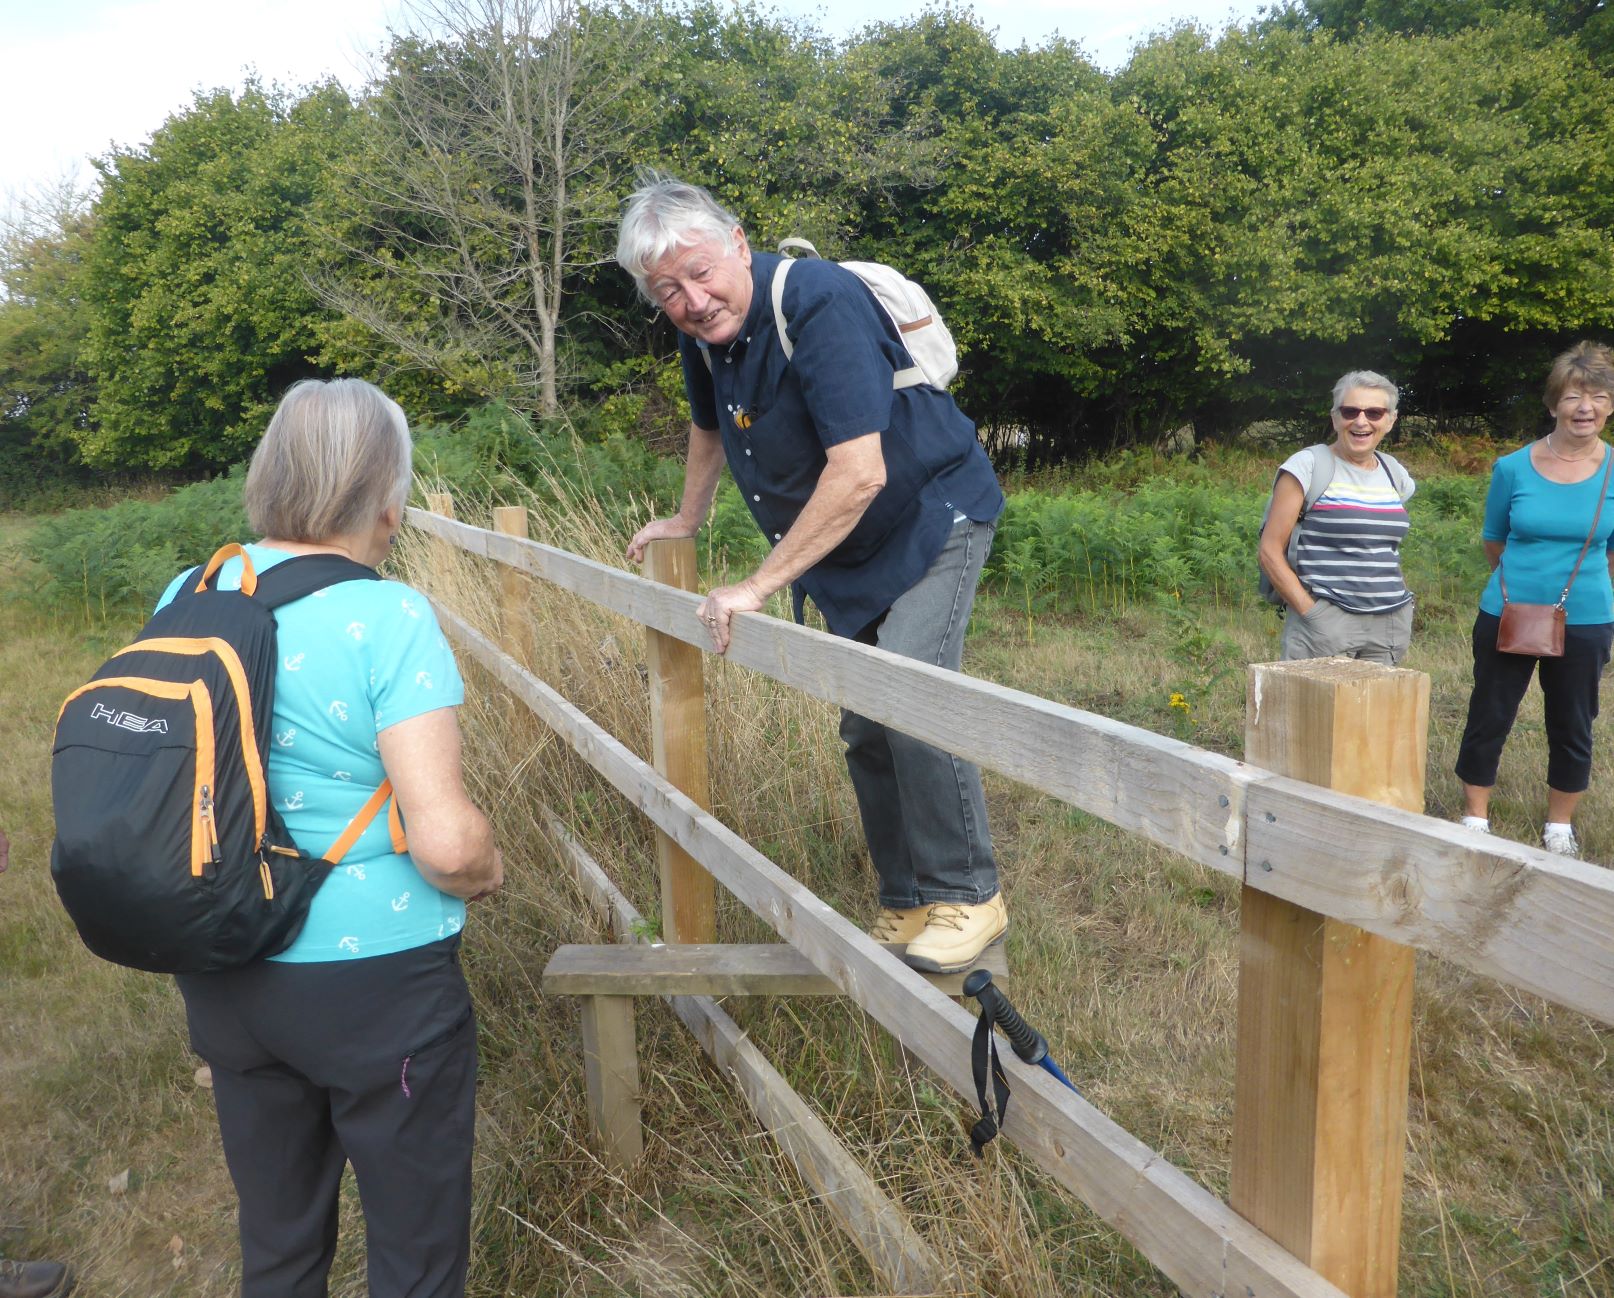 Crossing a stile Aug 22